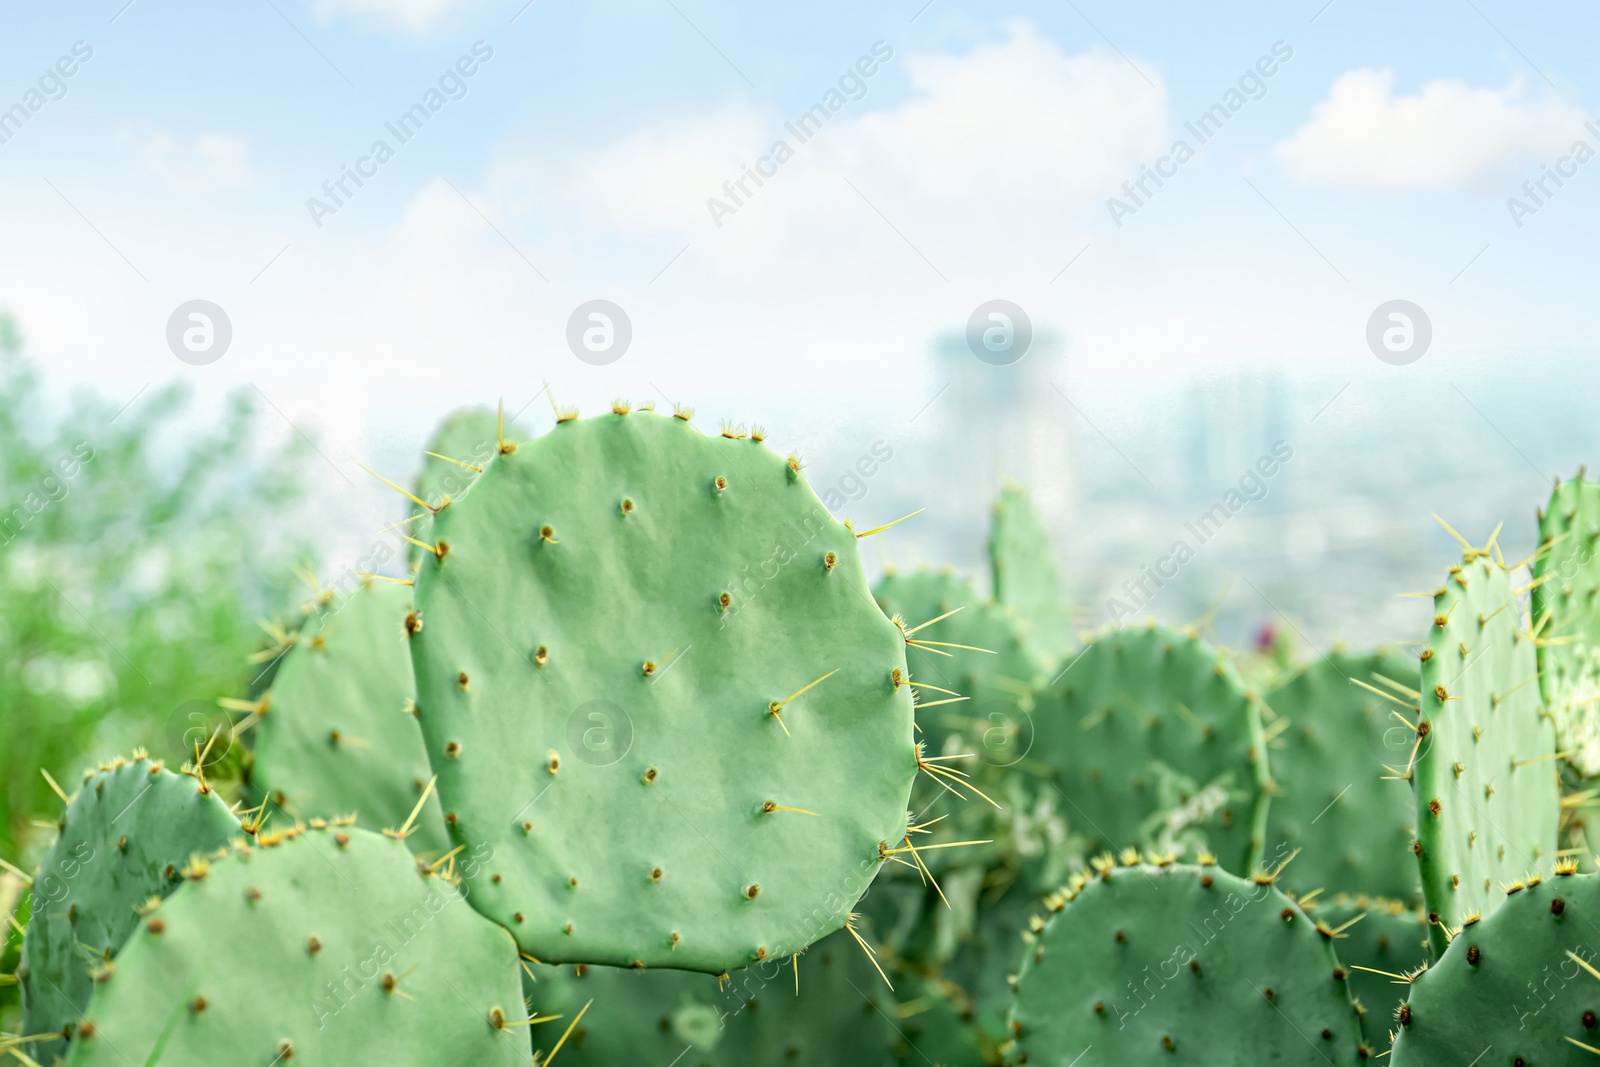 Photo of Beautiful view of cactuses with thorns under cloudy sky, closeup